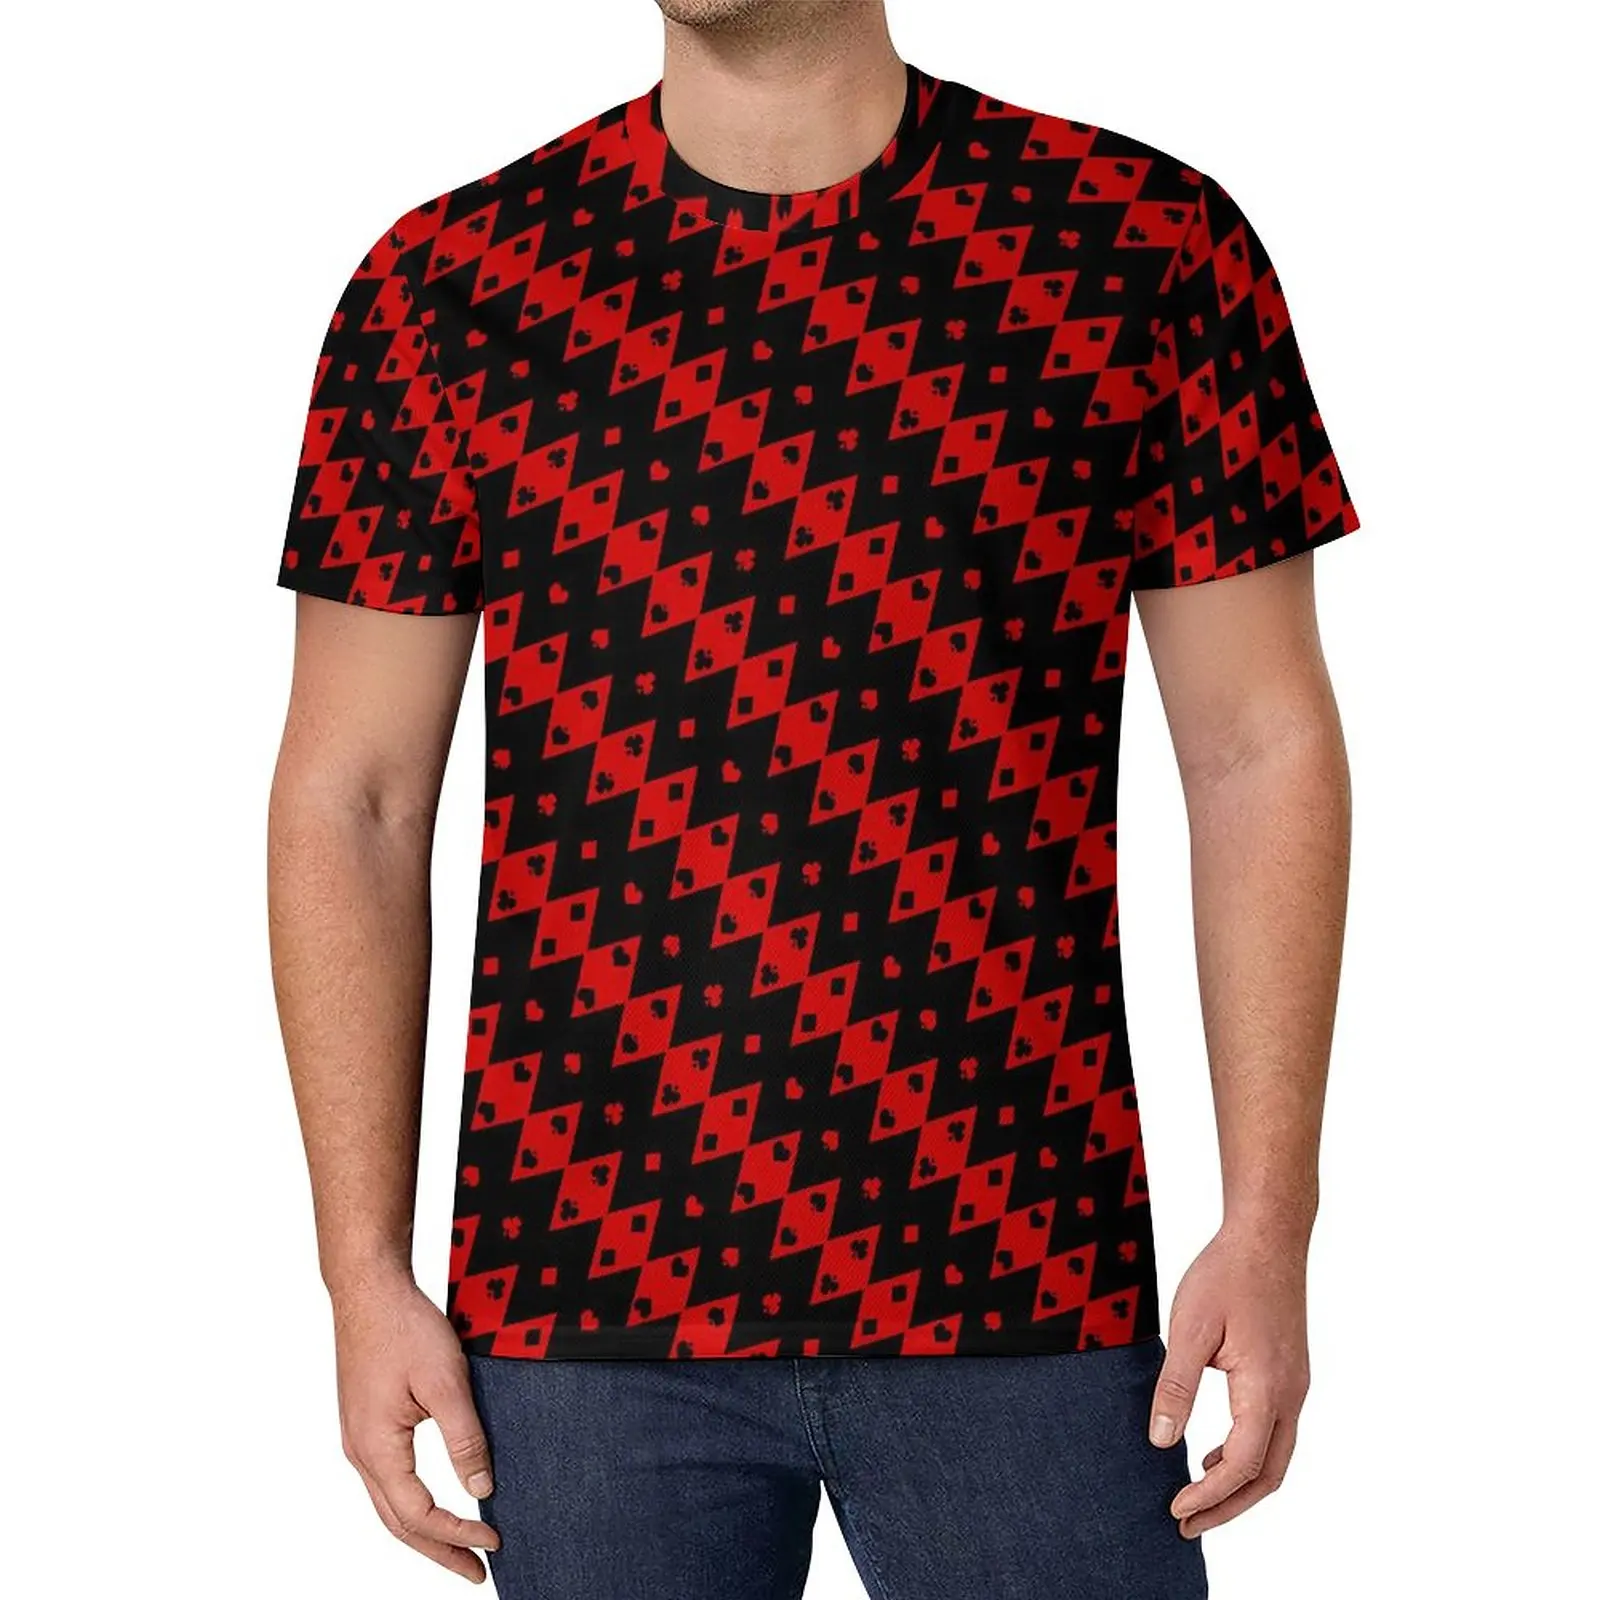 Playing Cards T Shirt Black and Red Shapes Hip Hop T Shirts Short Sleeves Custom Tshirt Essential Oversized Top Tees